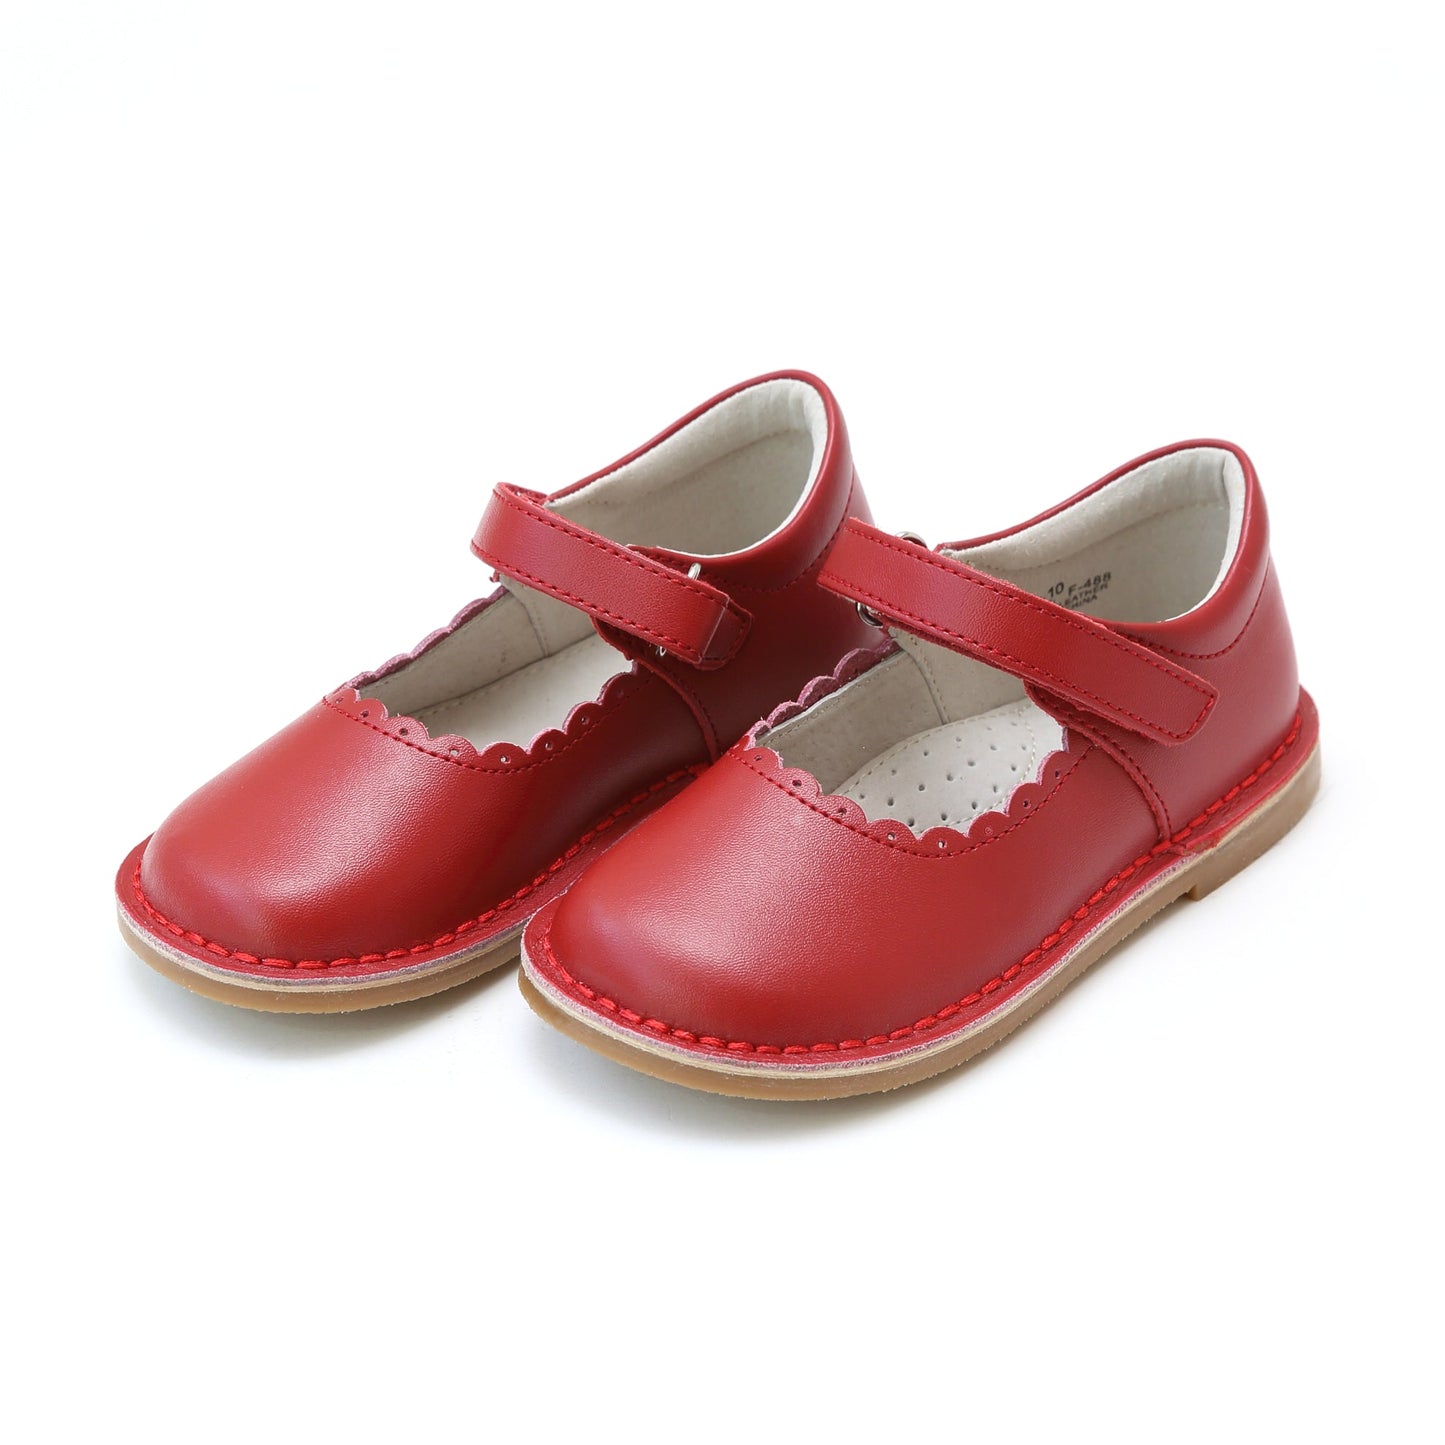 L'Amour Red Caitlin Scalloped Mary Jane